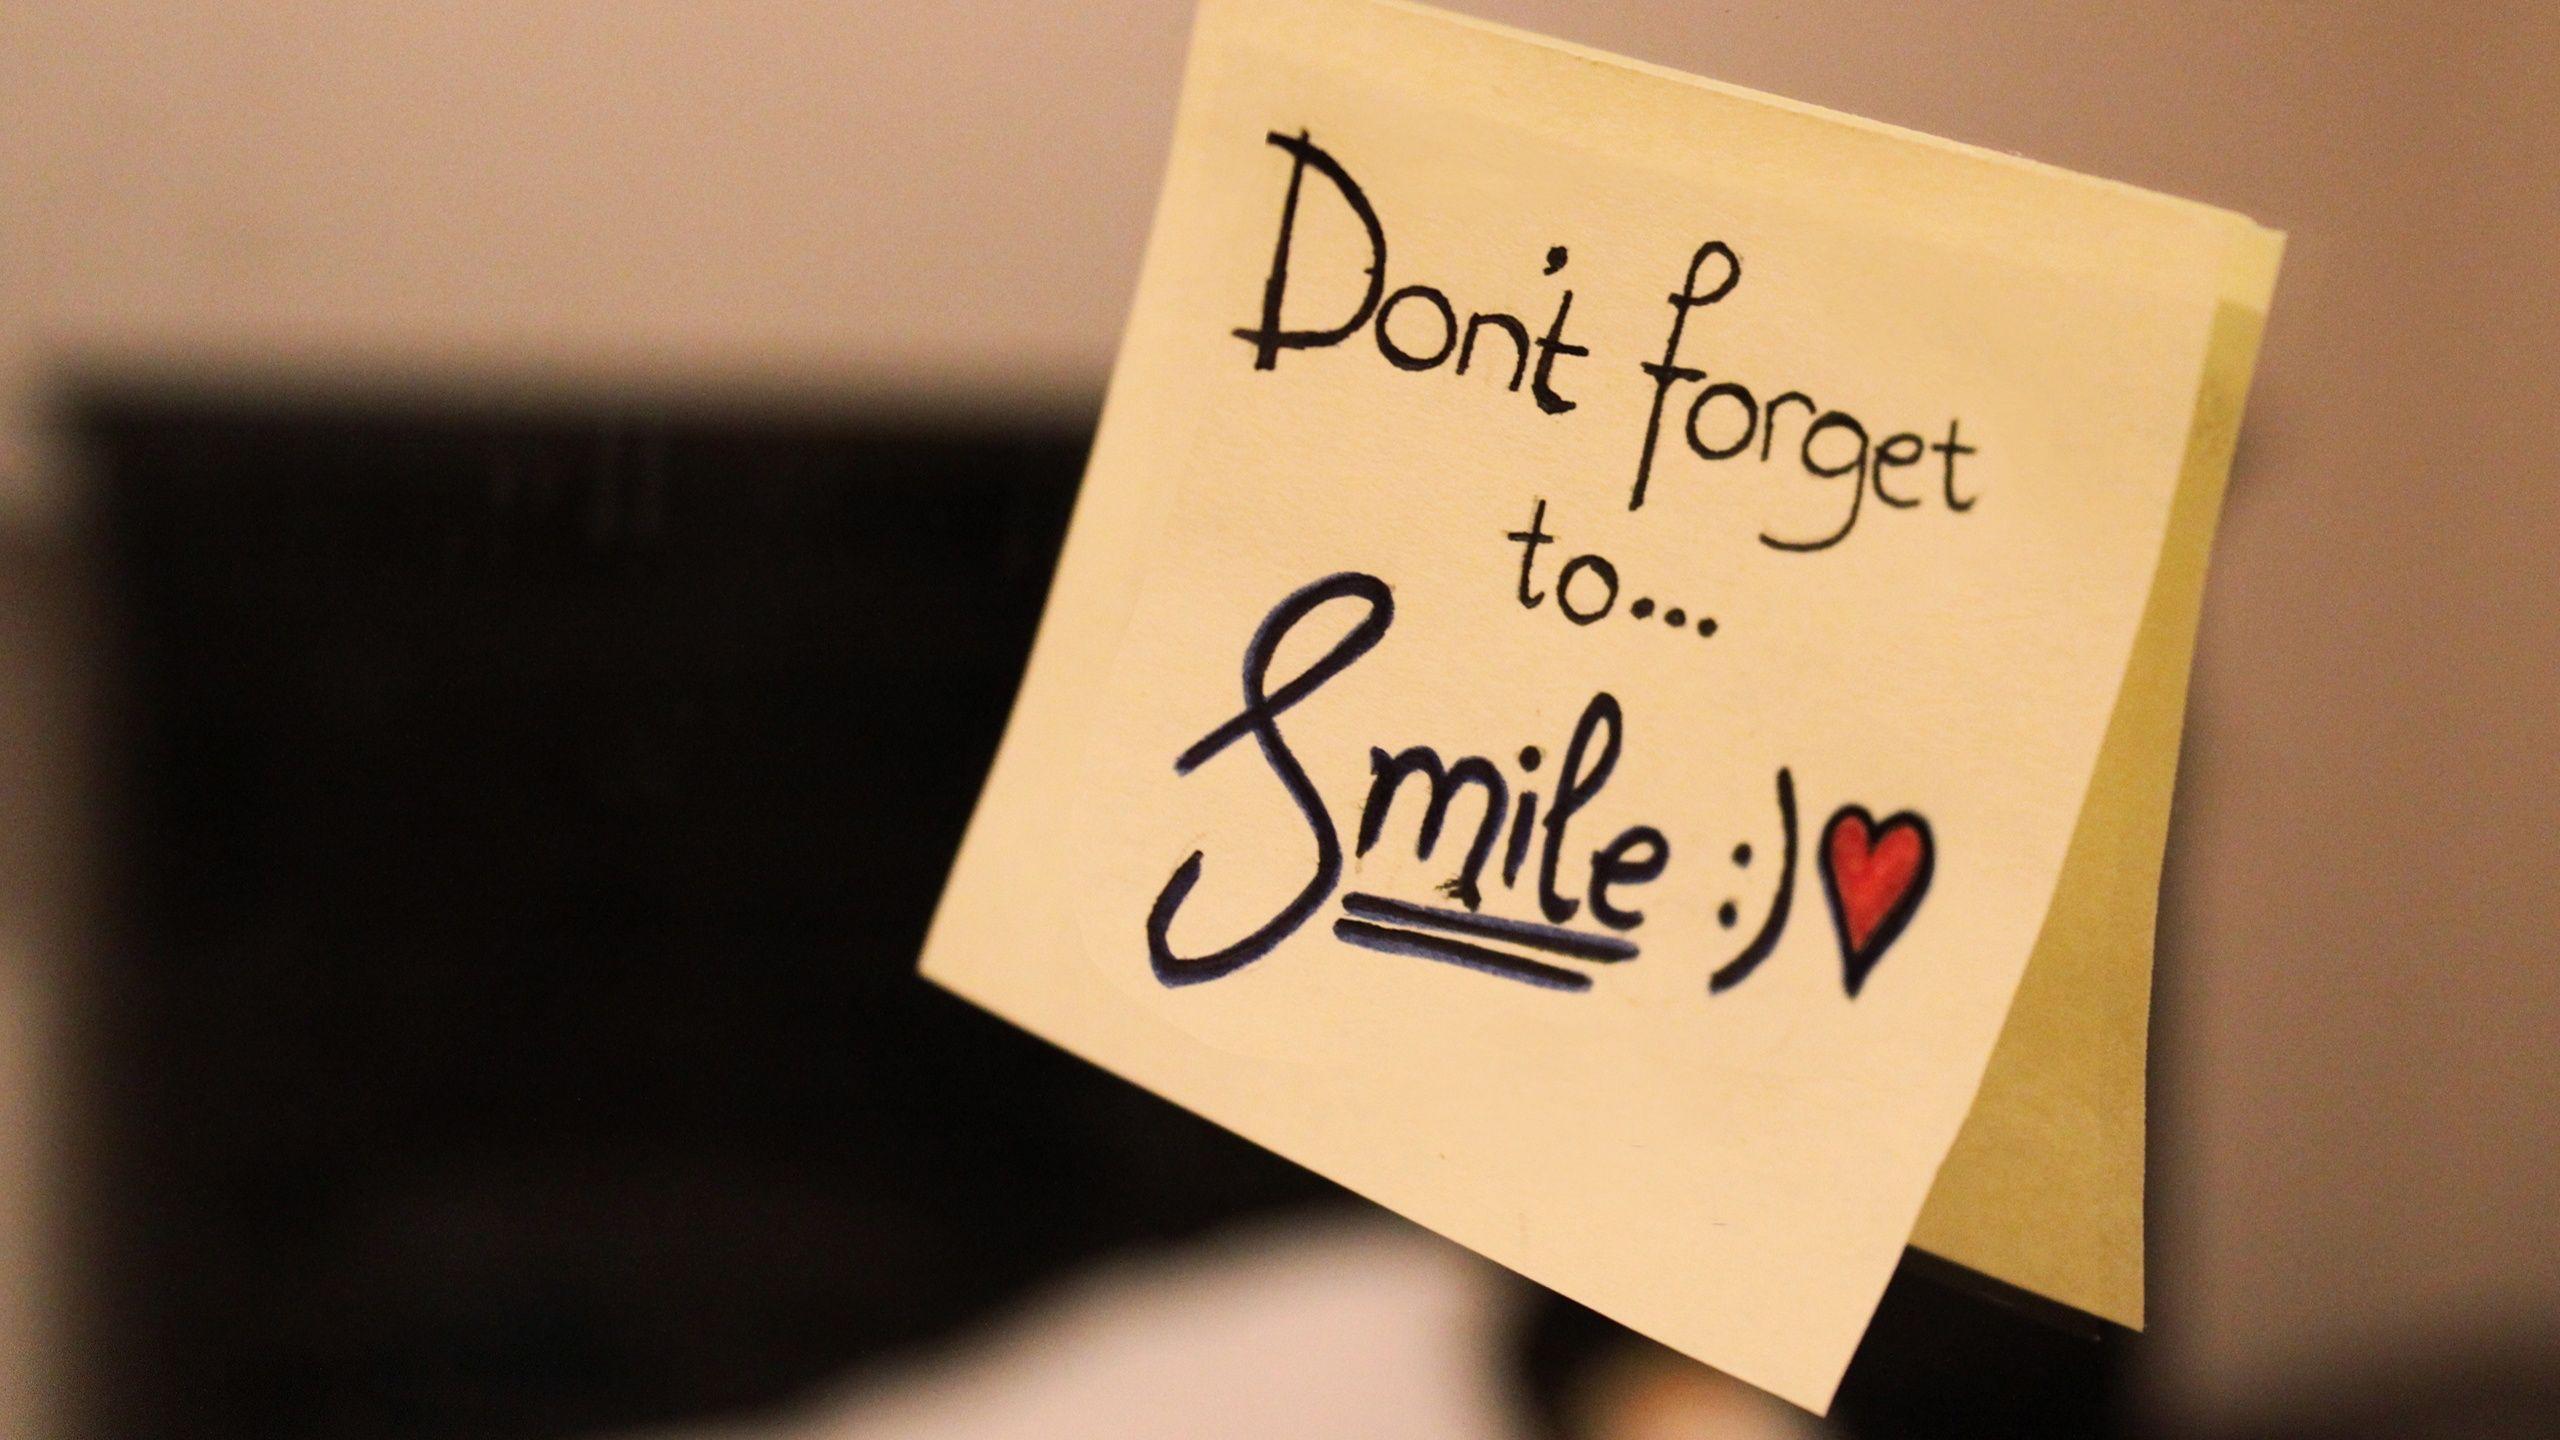 Wallpaper For > Smile Wallpaper With Quotes